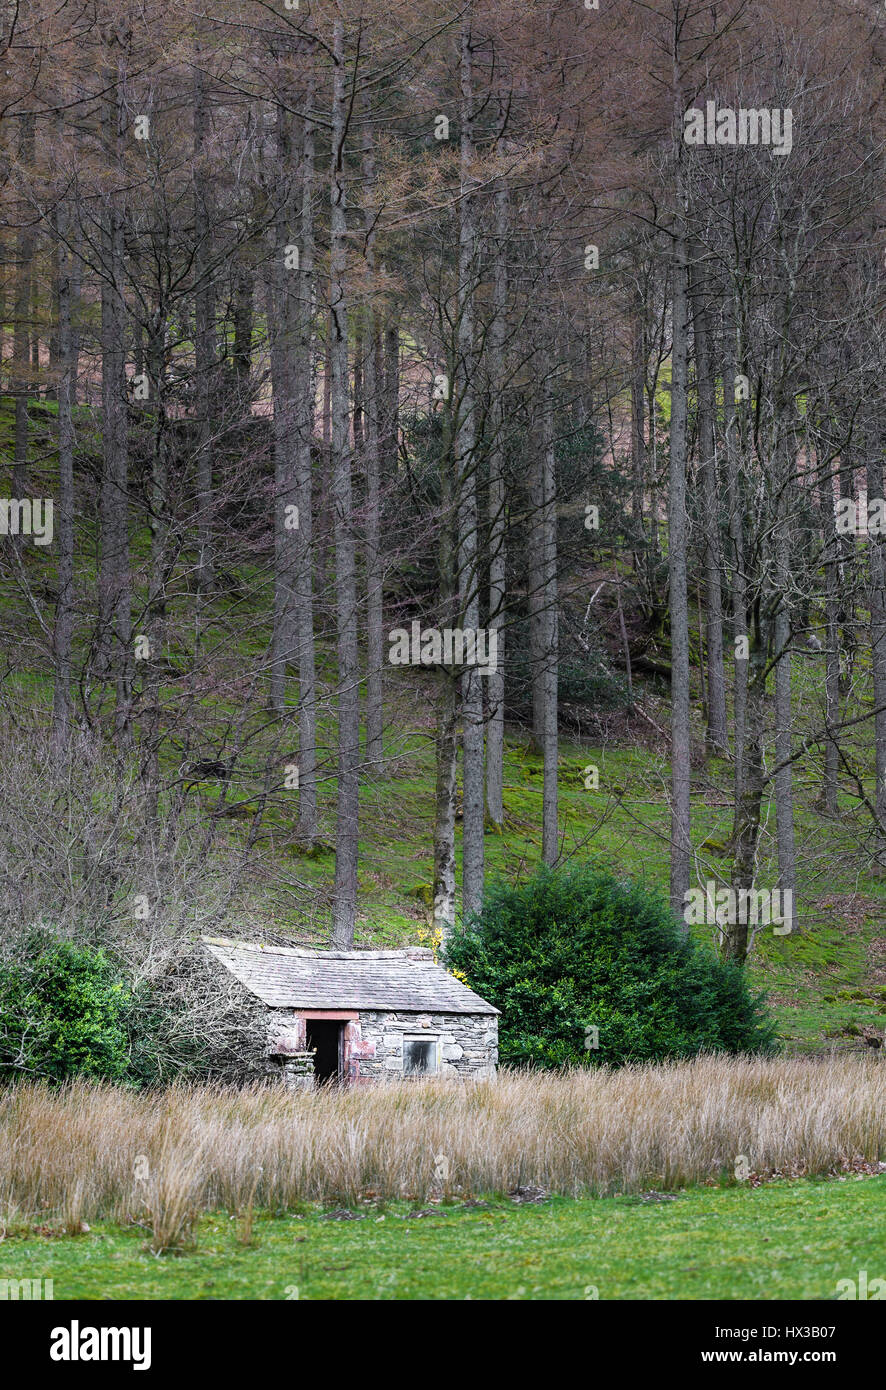 Abandoned home, Buttermere lake, Lake District, Cumbria, England. Stock Photo